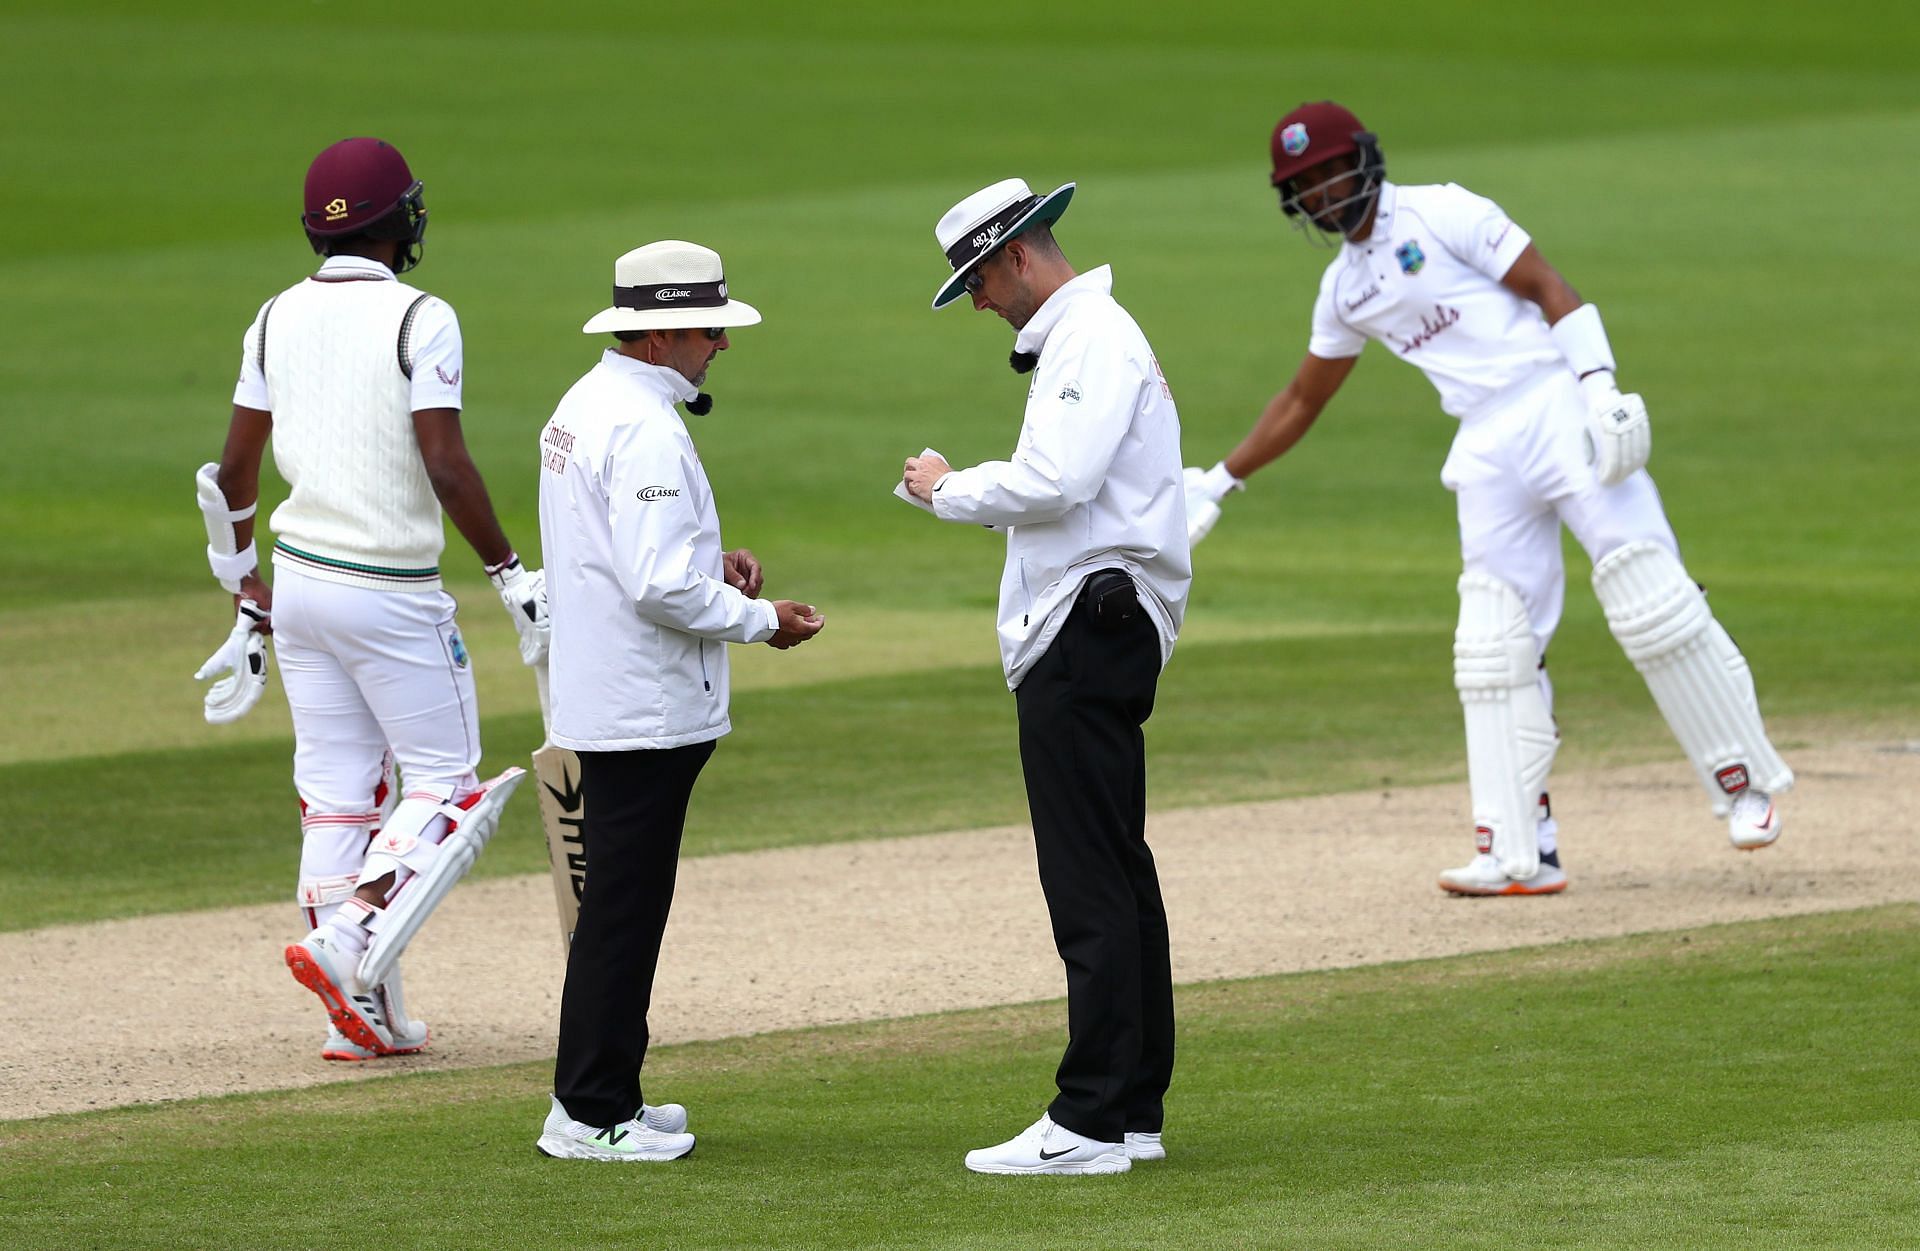 Umpires sanitise the ball after saliva is accidentally added to it during a Test at Old Trafford in July 19, 2020. Pic: Getty Images